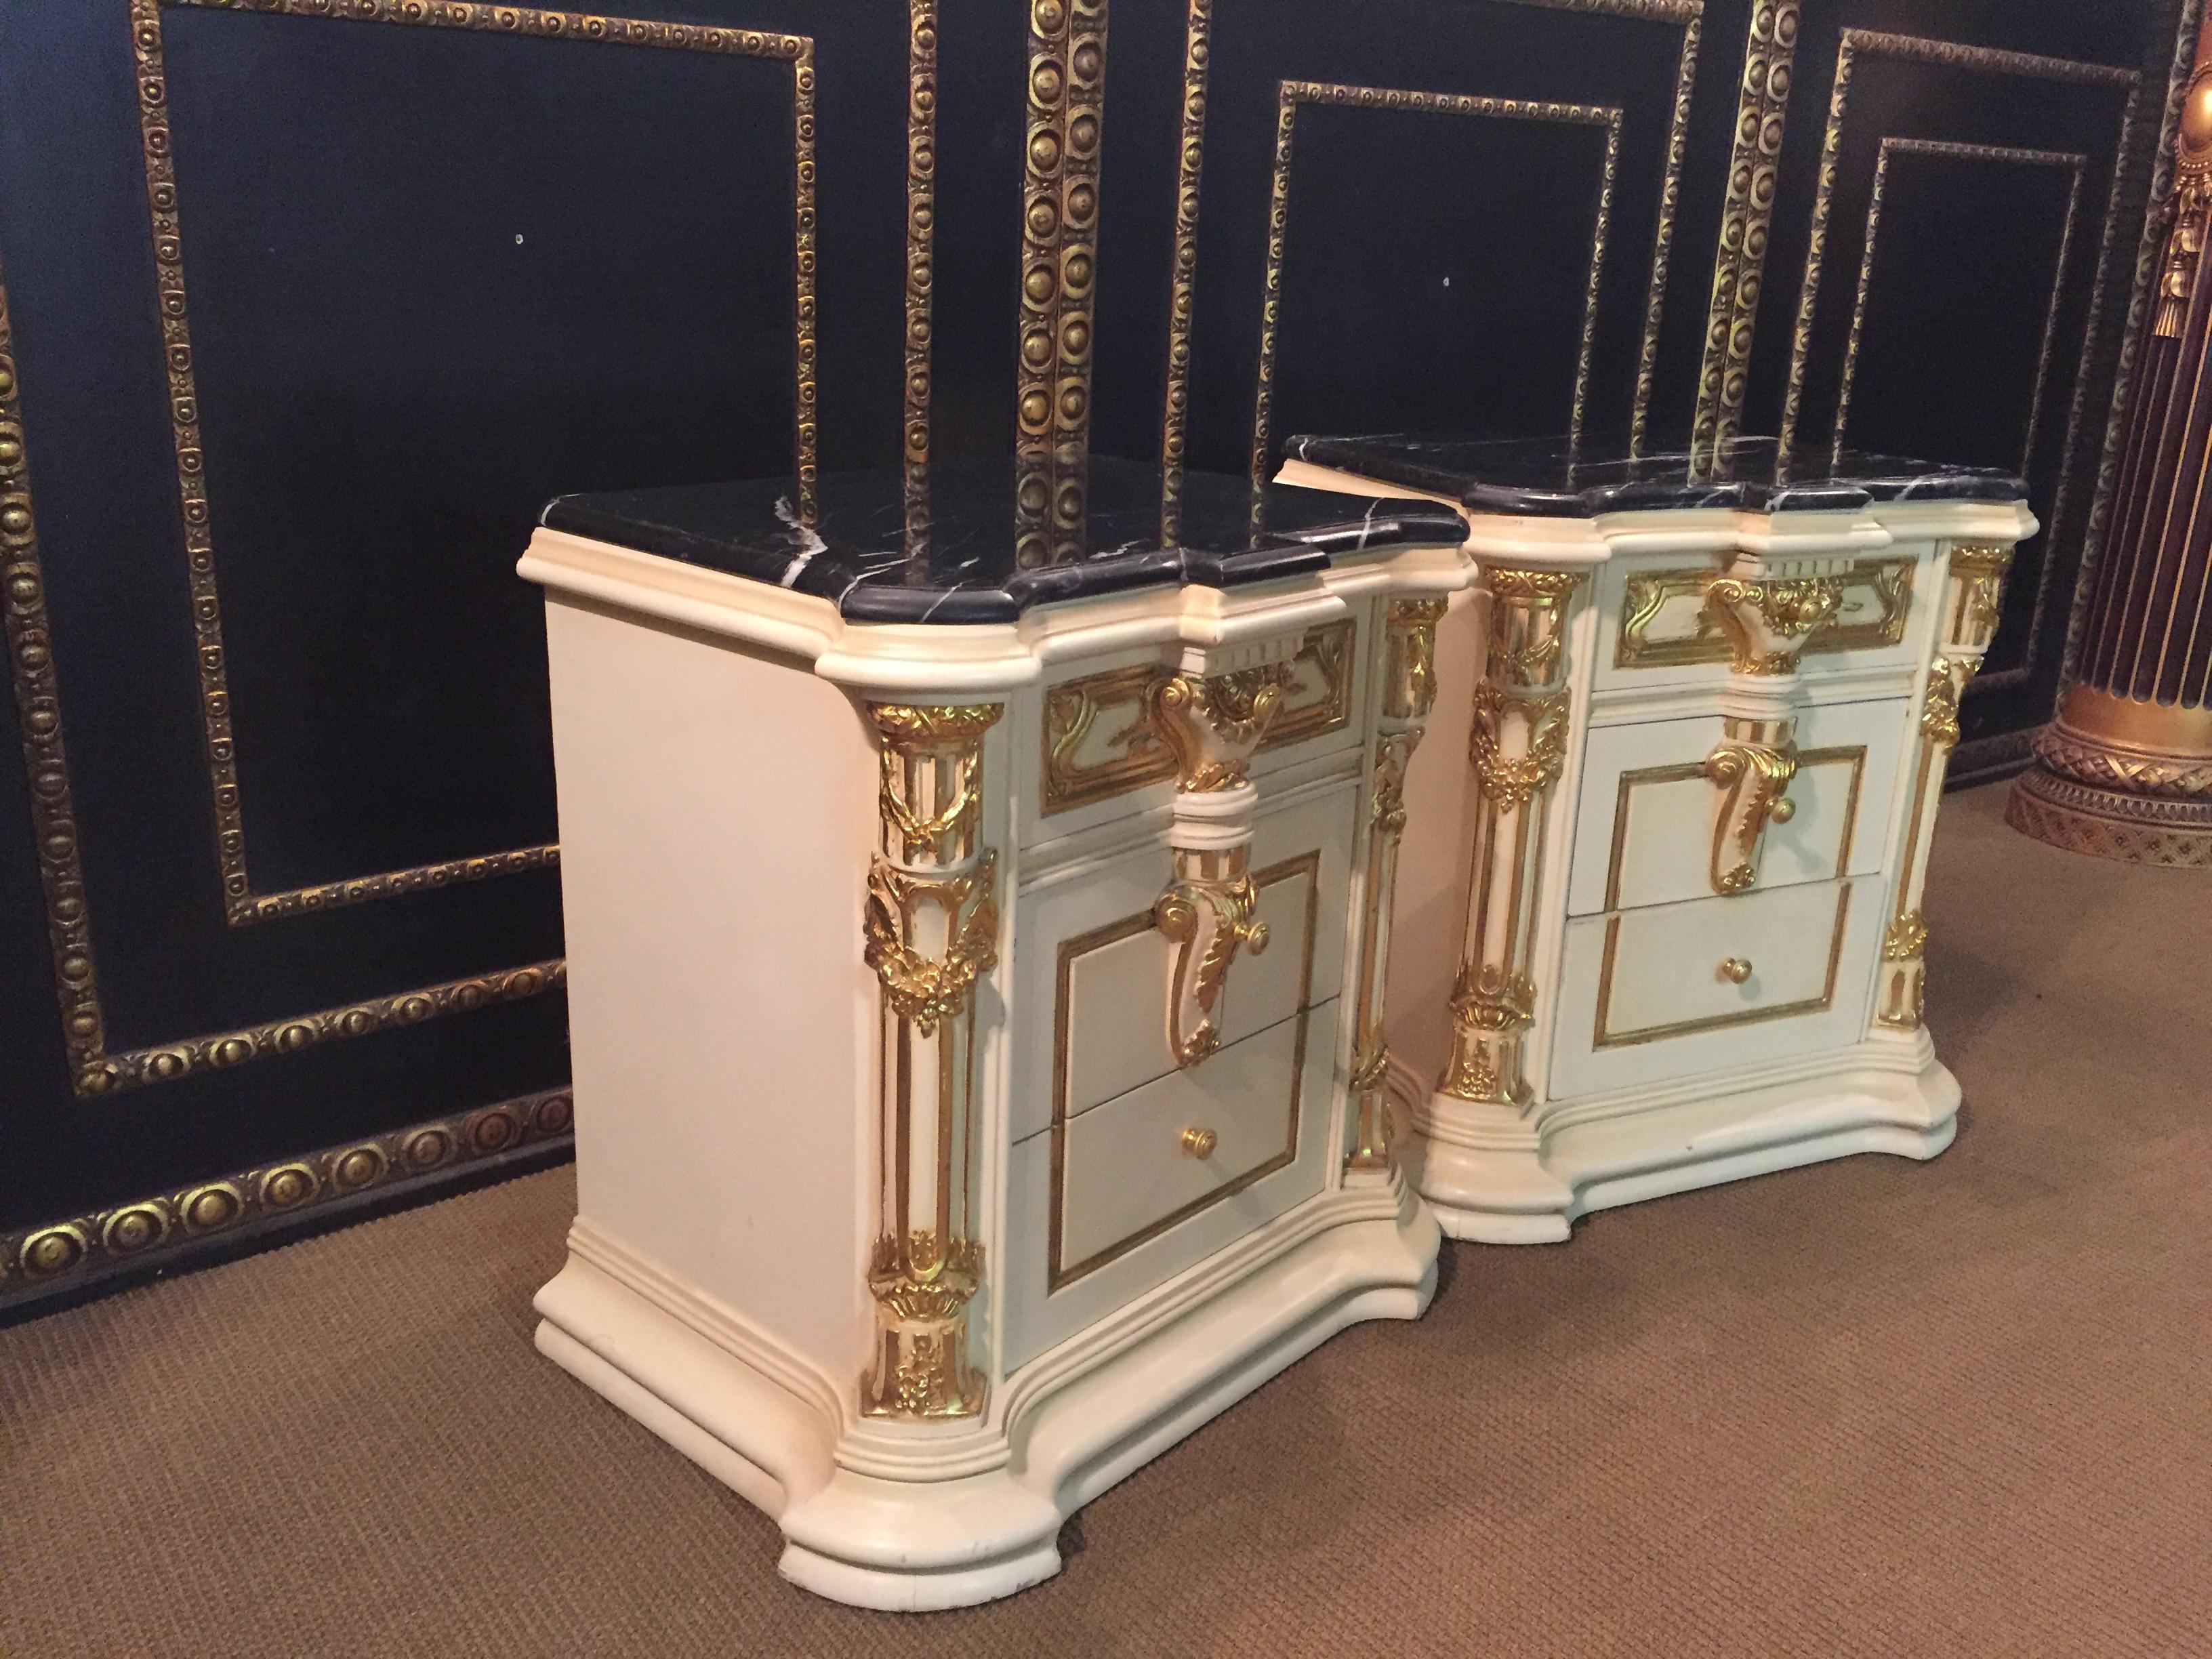 French Majestic Baroque Bedside Commode / shelve in the Style of Louis XVI beech carved